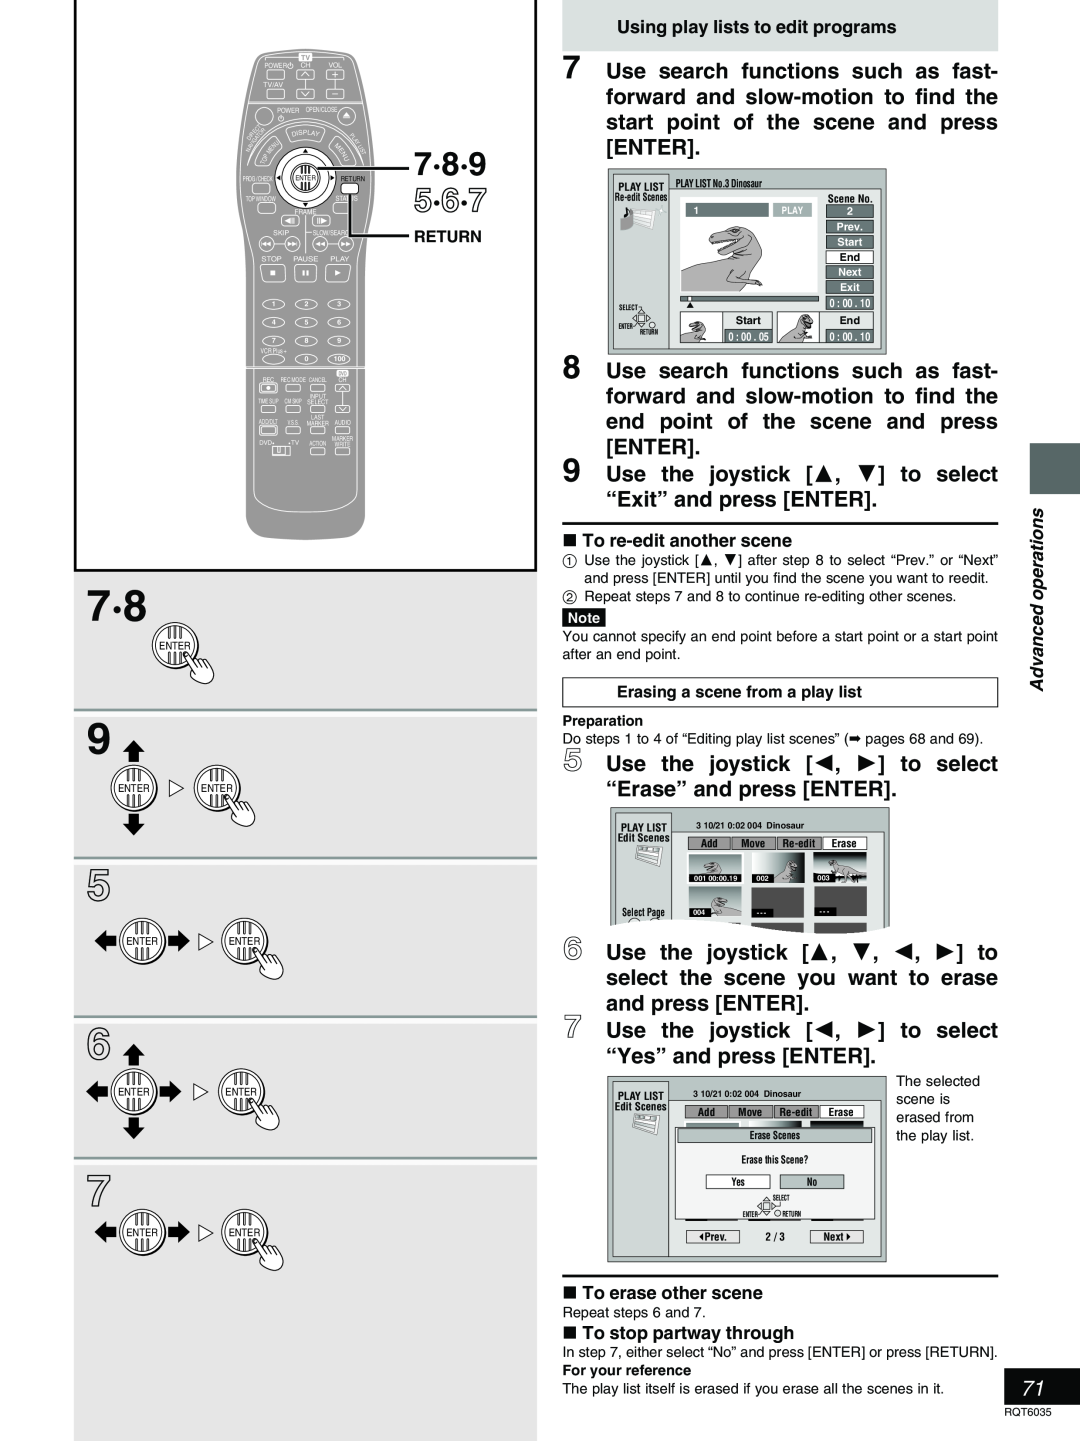 Panasonic DMR-E20 7·8·9, 5·6·7, Use the joystick 3, 4 to select “Exit” and press ENTER, Using play lists to edit programs 